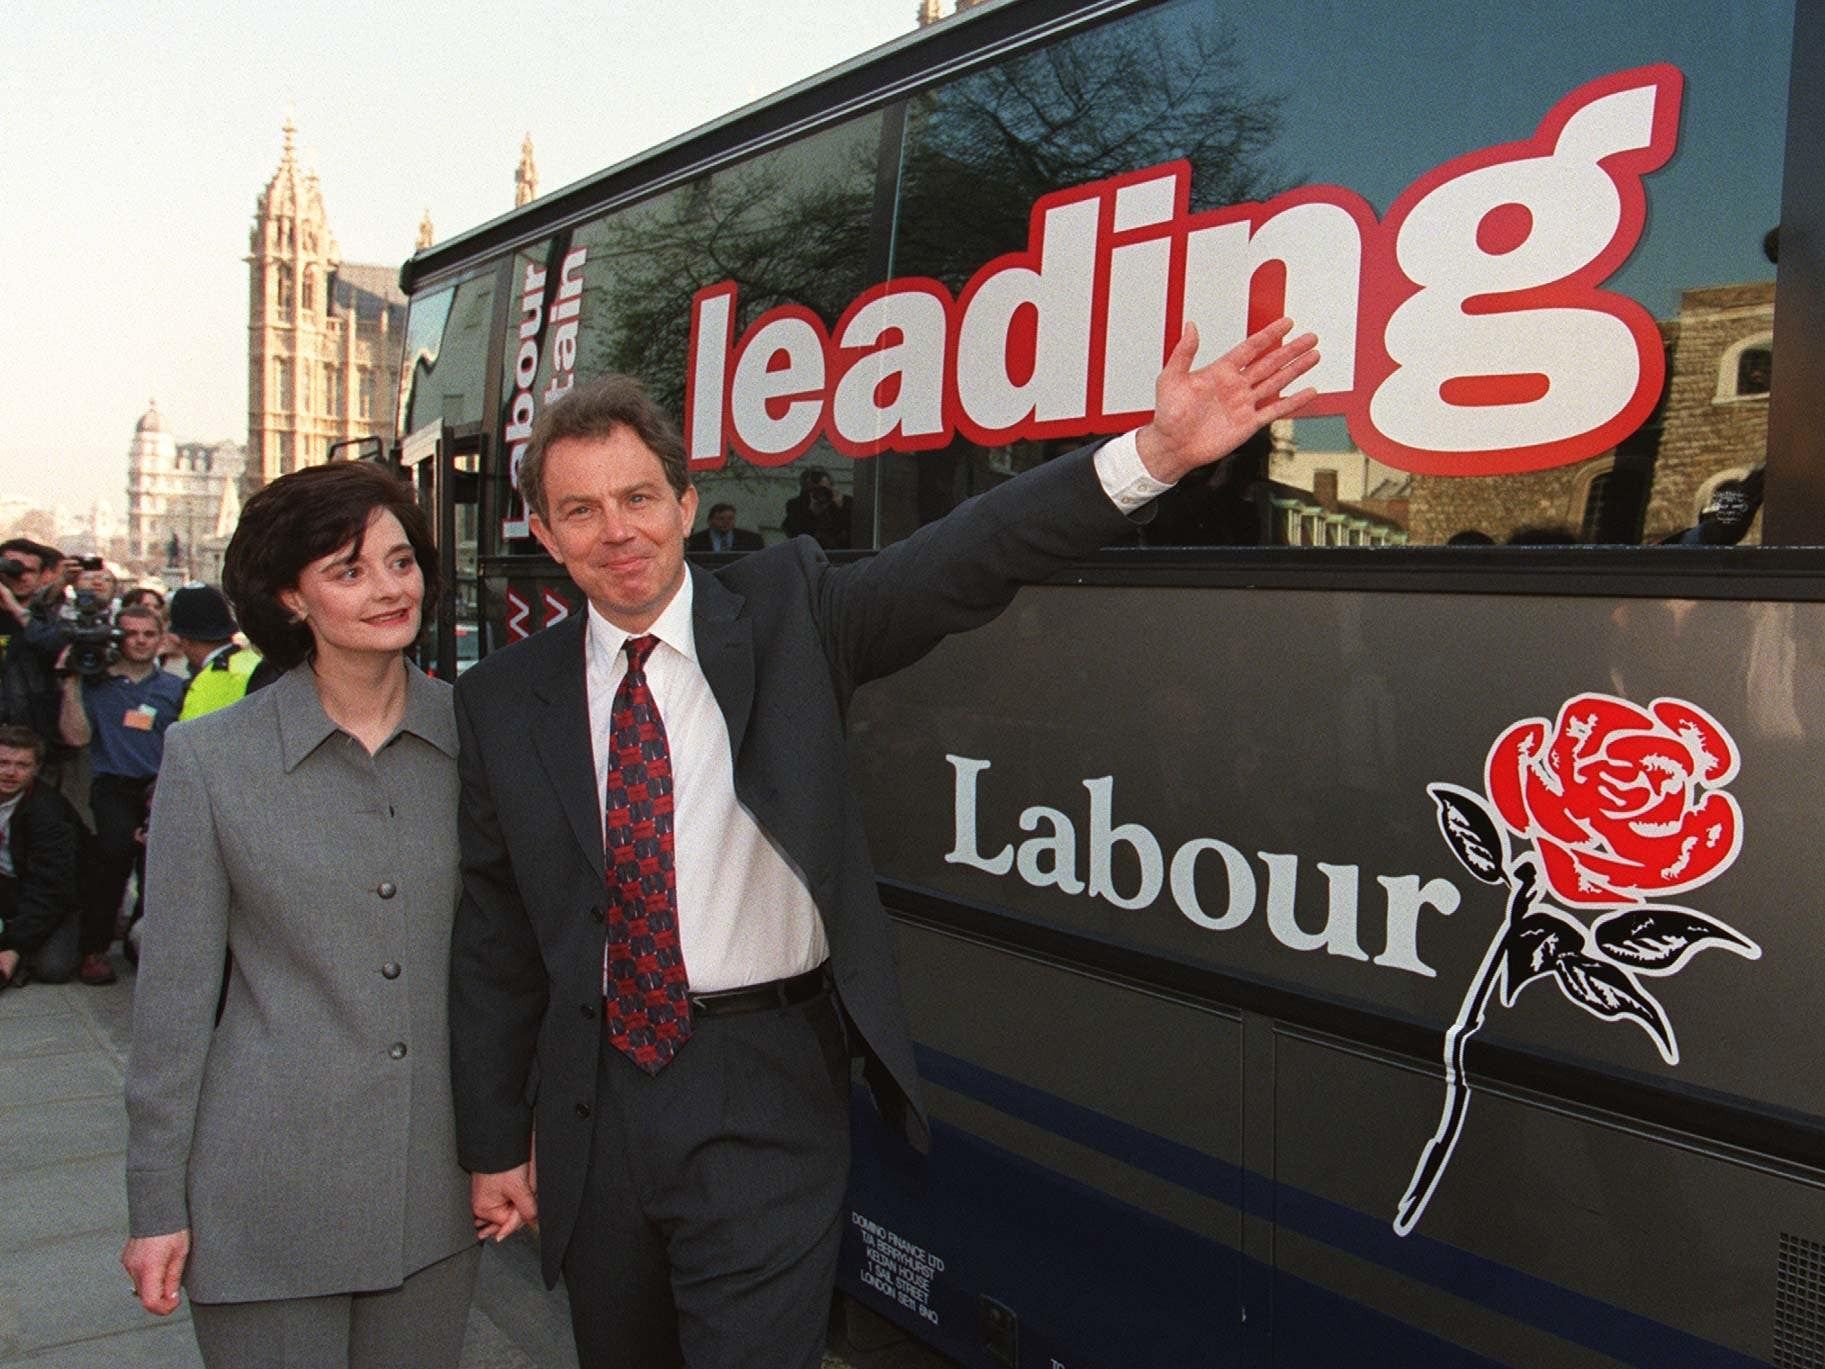 No 10 wanted a prime ministerial battle bus for Tony Blair, records show